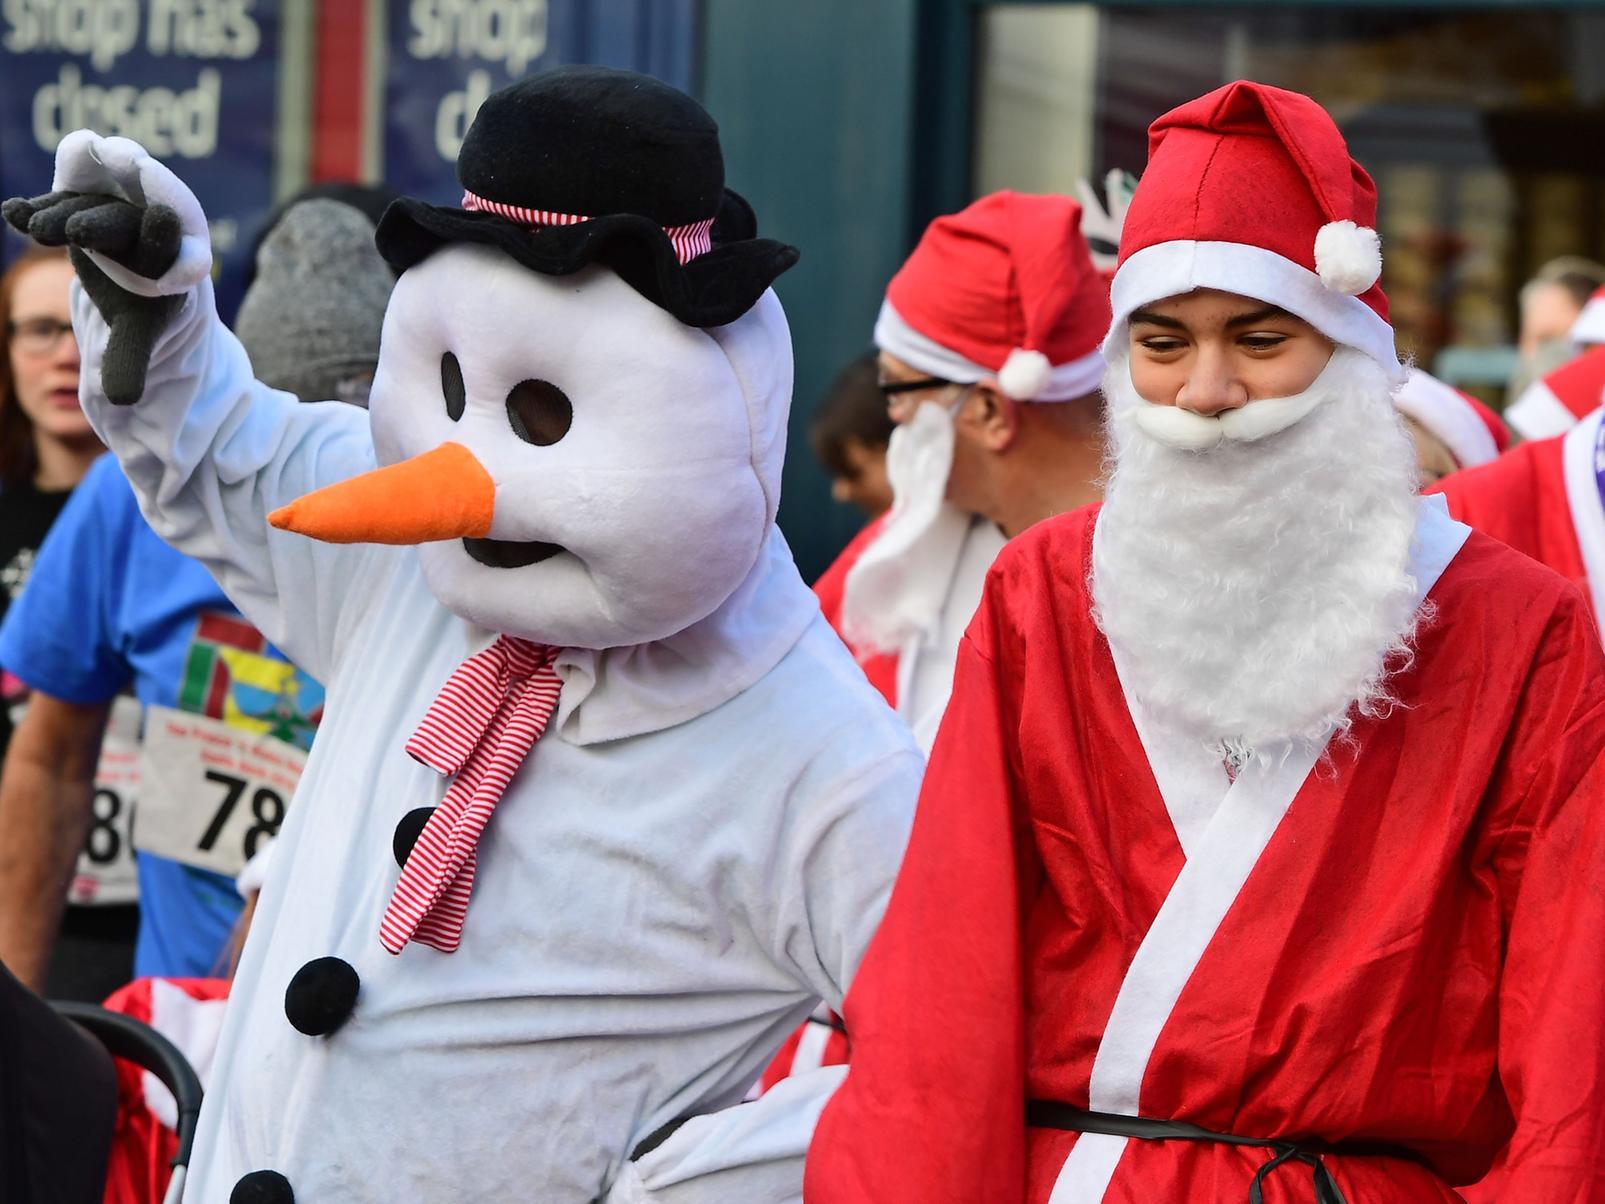 The Santa Dash also attracted snowmen, Christmas trees and elves.